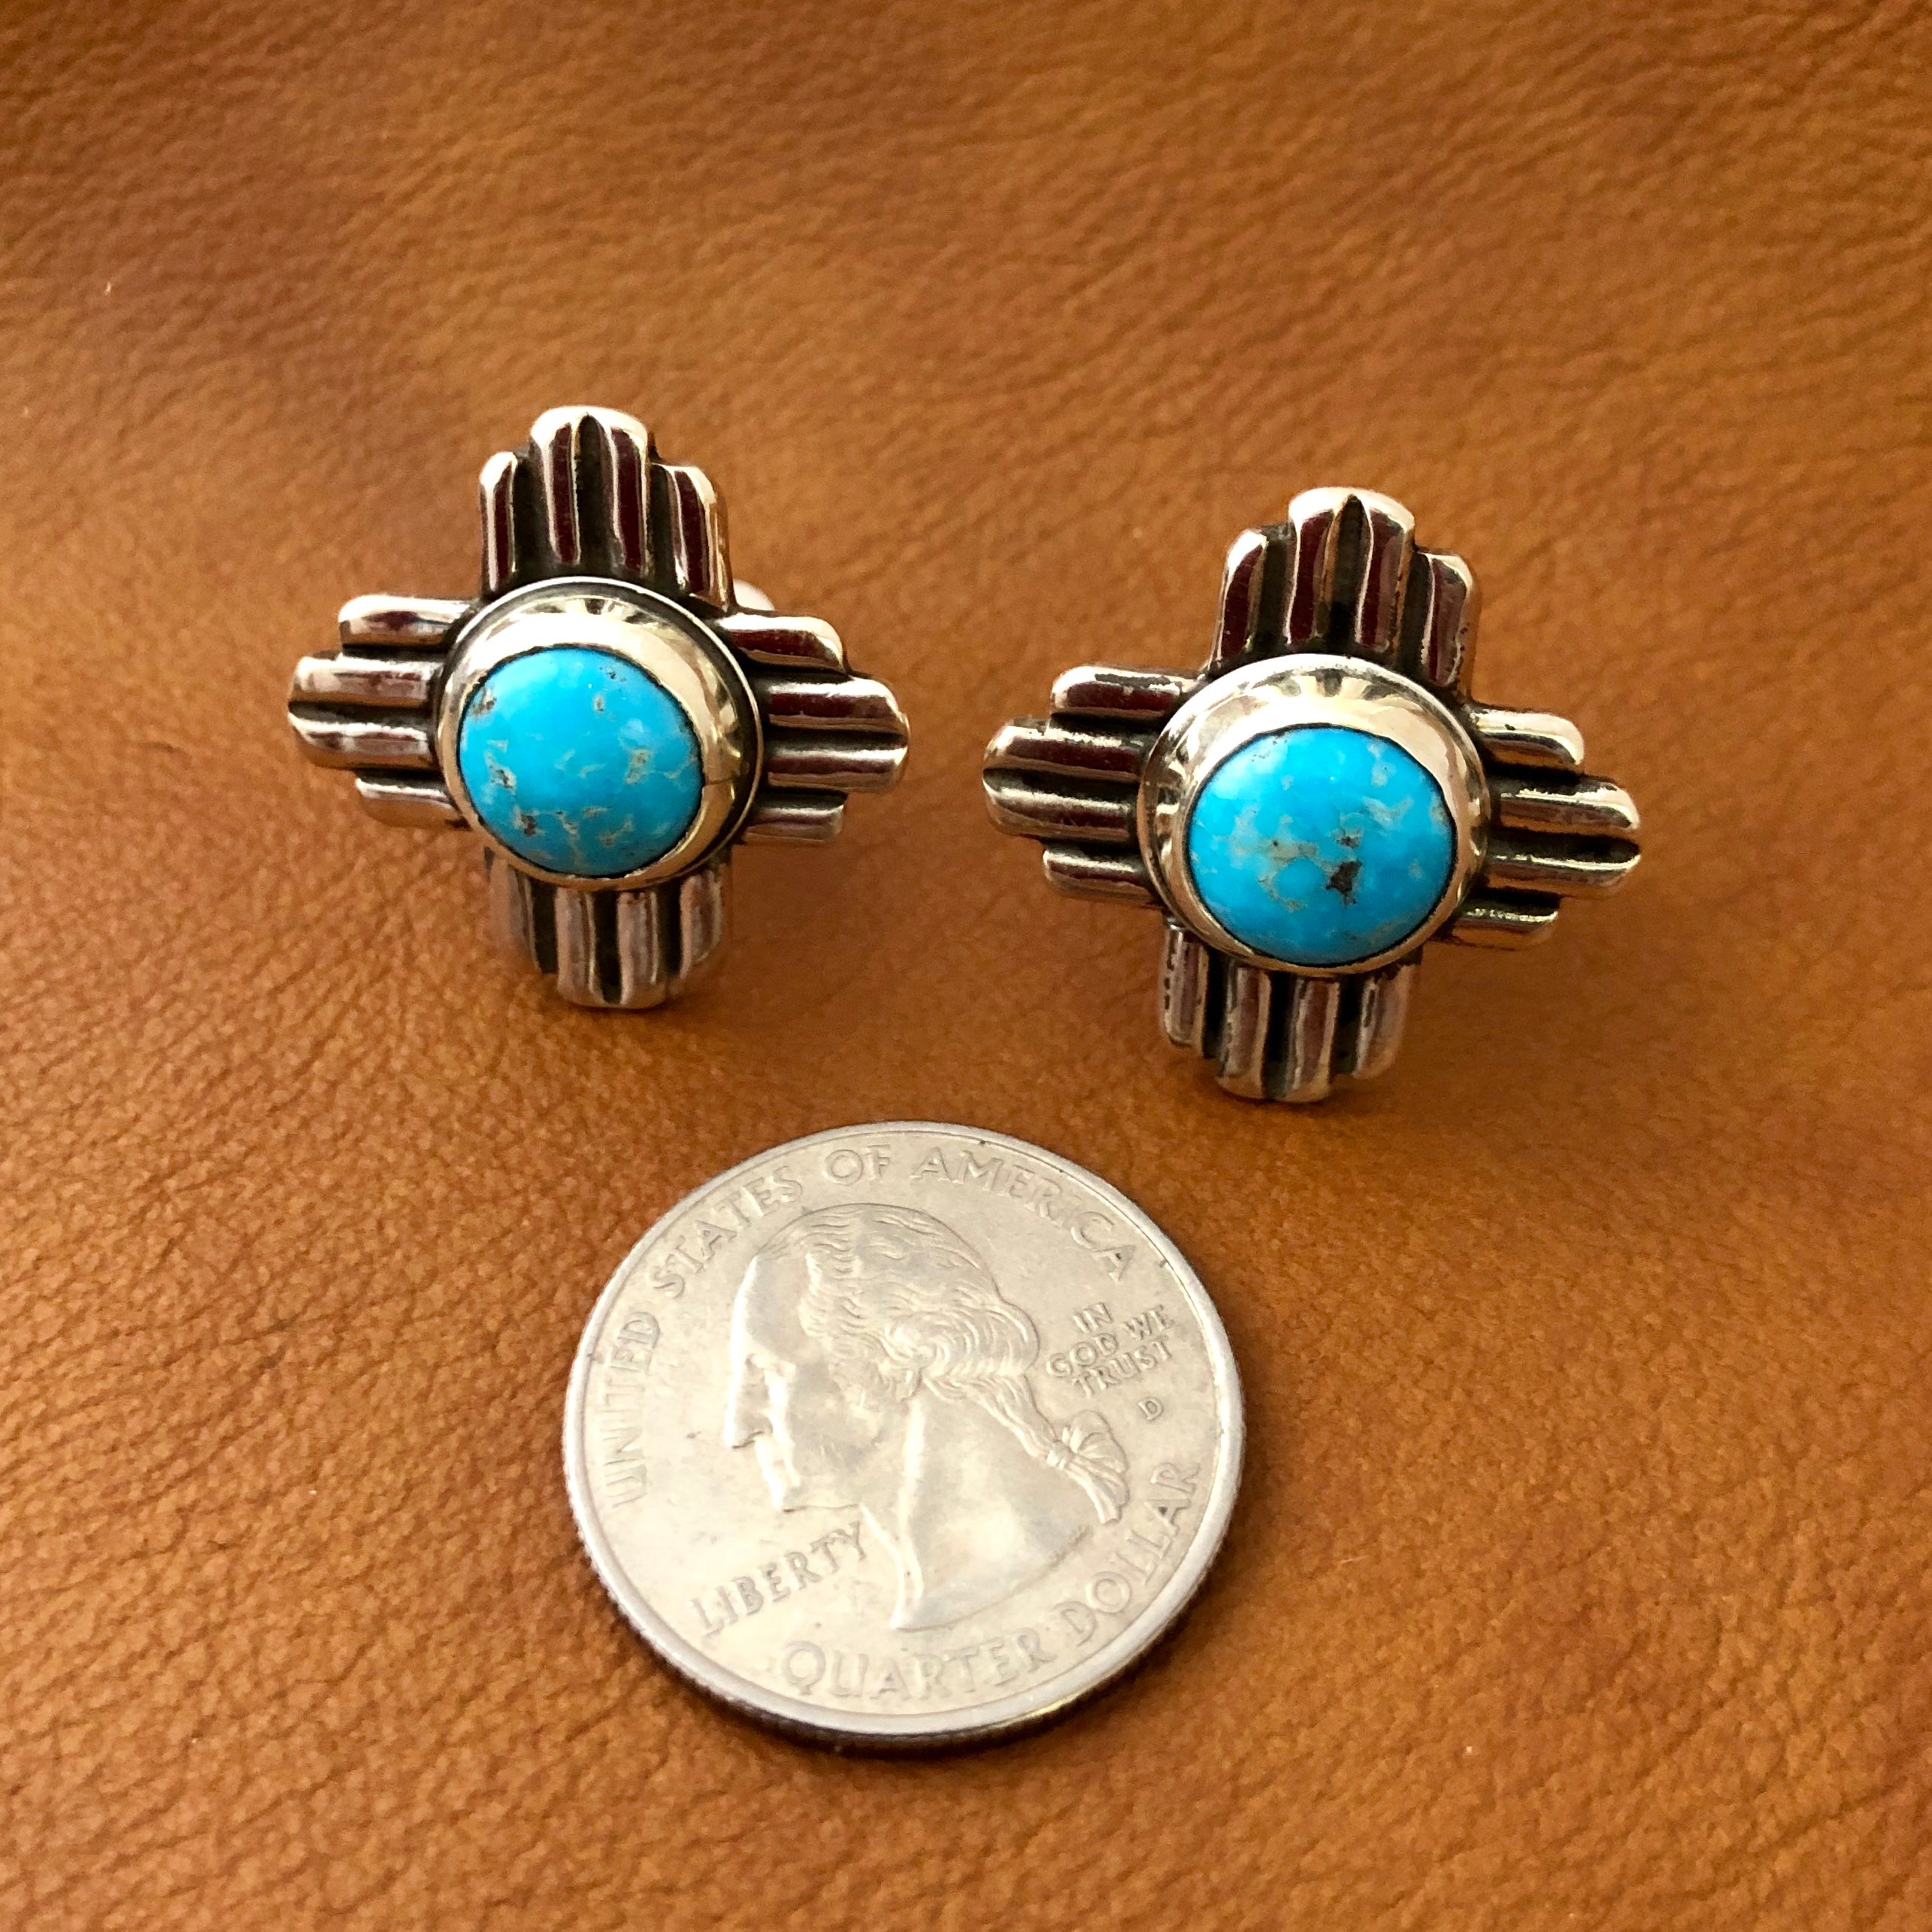 Zia Turquoise Cuff Links